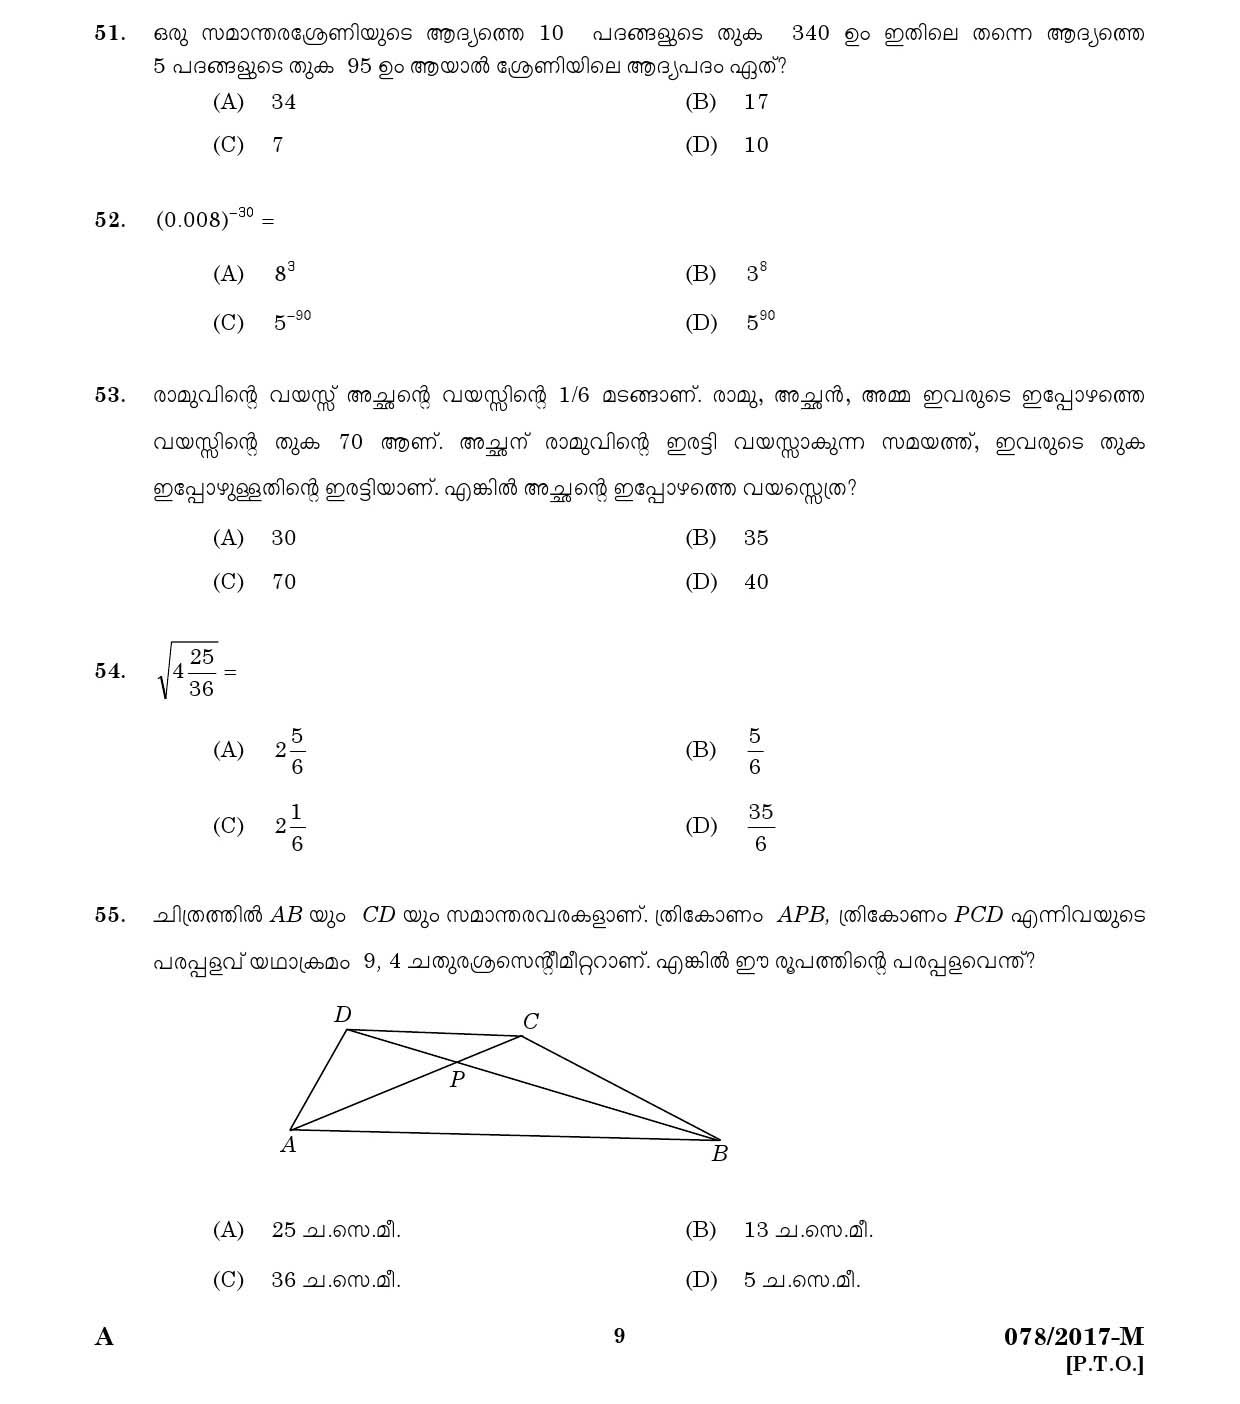 LD Clerk Various Question Paper 2017 Malayalam Paper Code 0782017 M 7